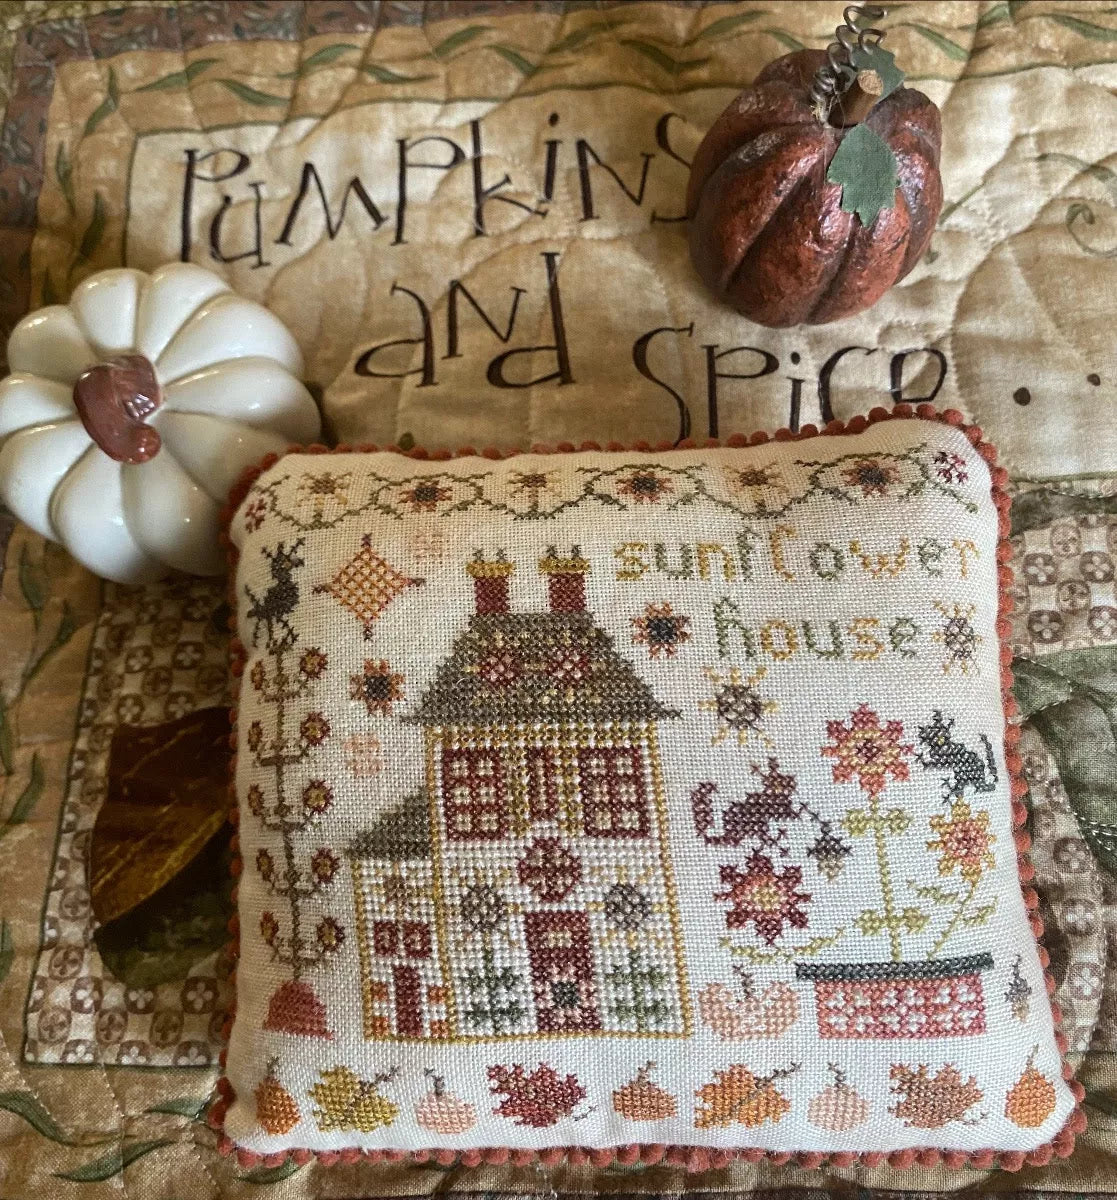 Sunflower House -  The Houses on Pumpkin Lane #4 - Pansy Patch Quilts and Stitchery, Needlecraft Patterns, Needlecraft Patterns, The Crafty Grimalkin - A Cross Stitch Store